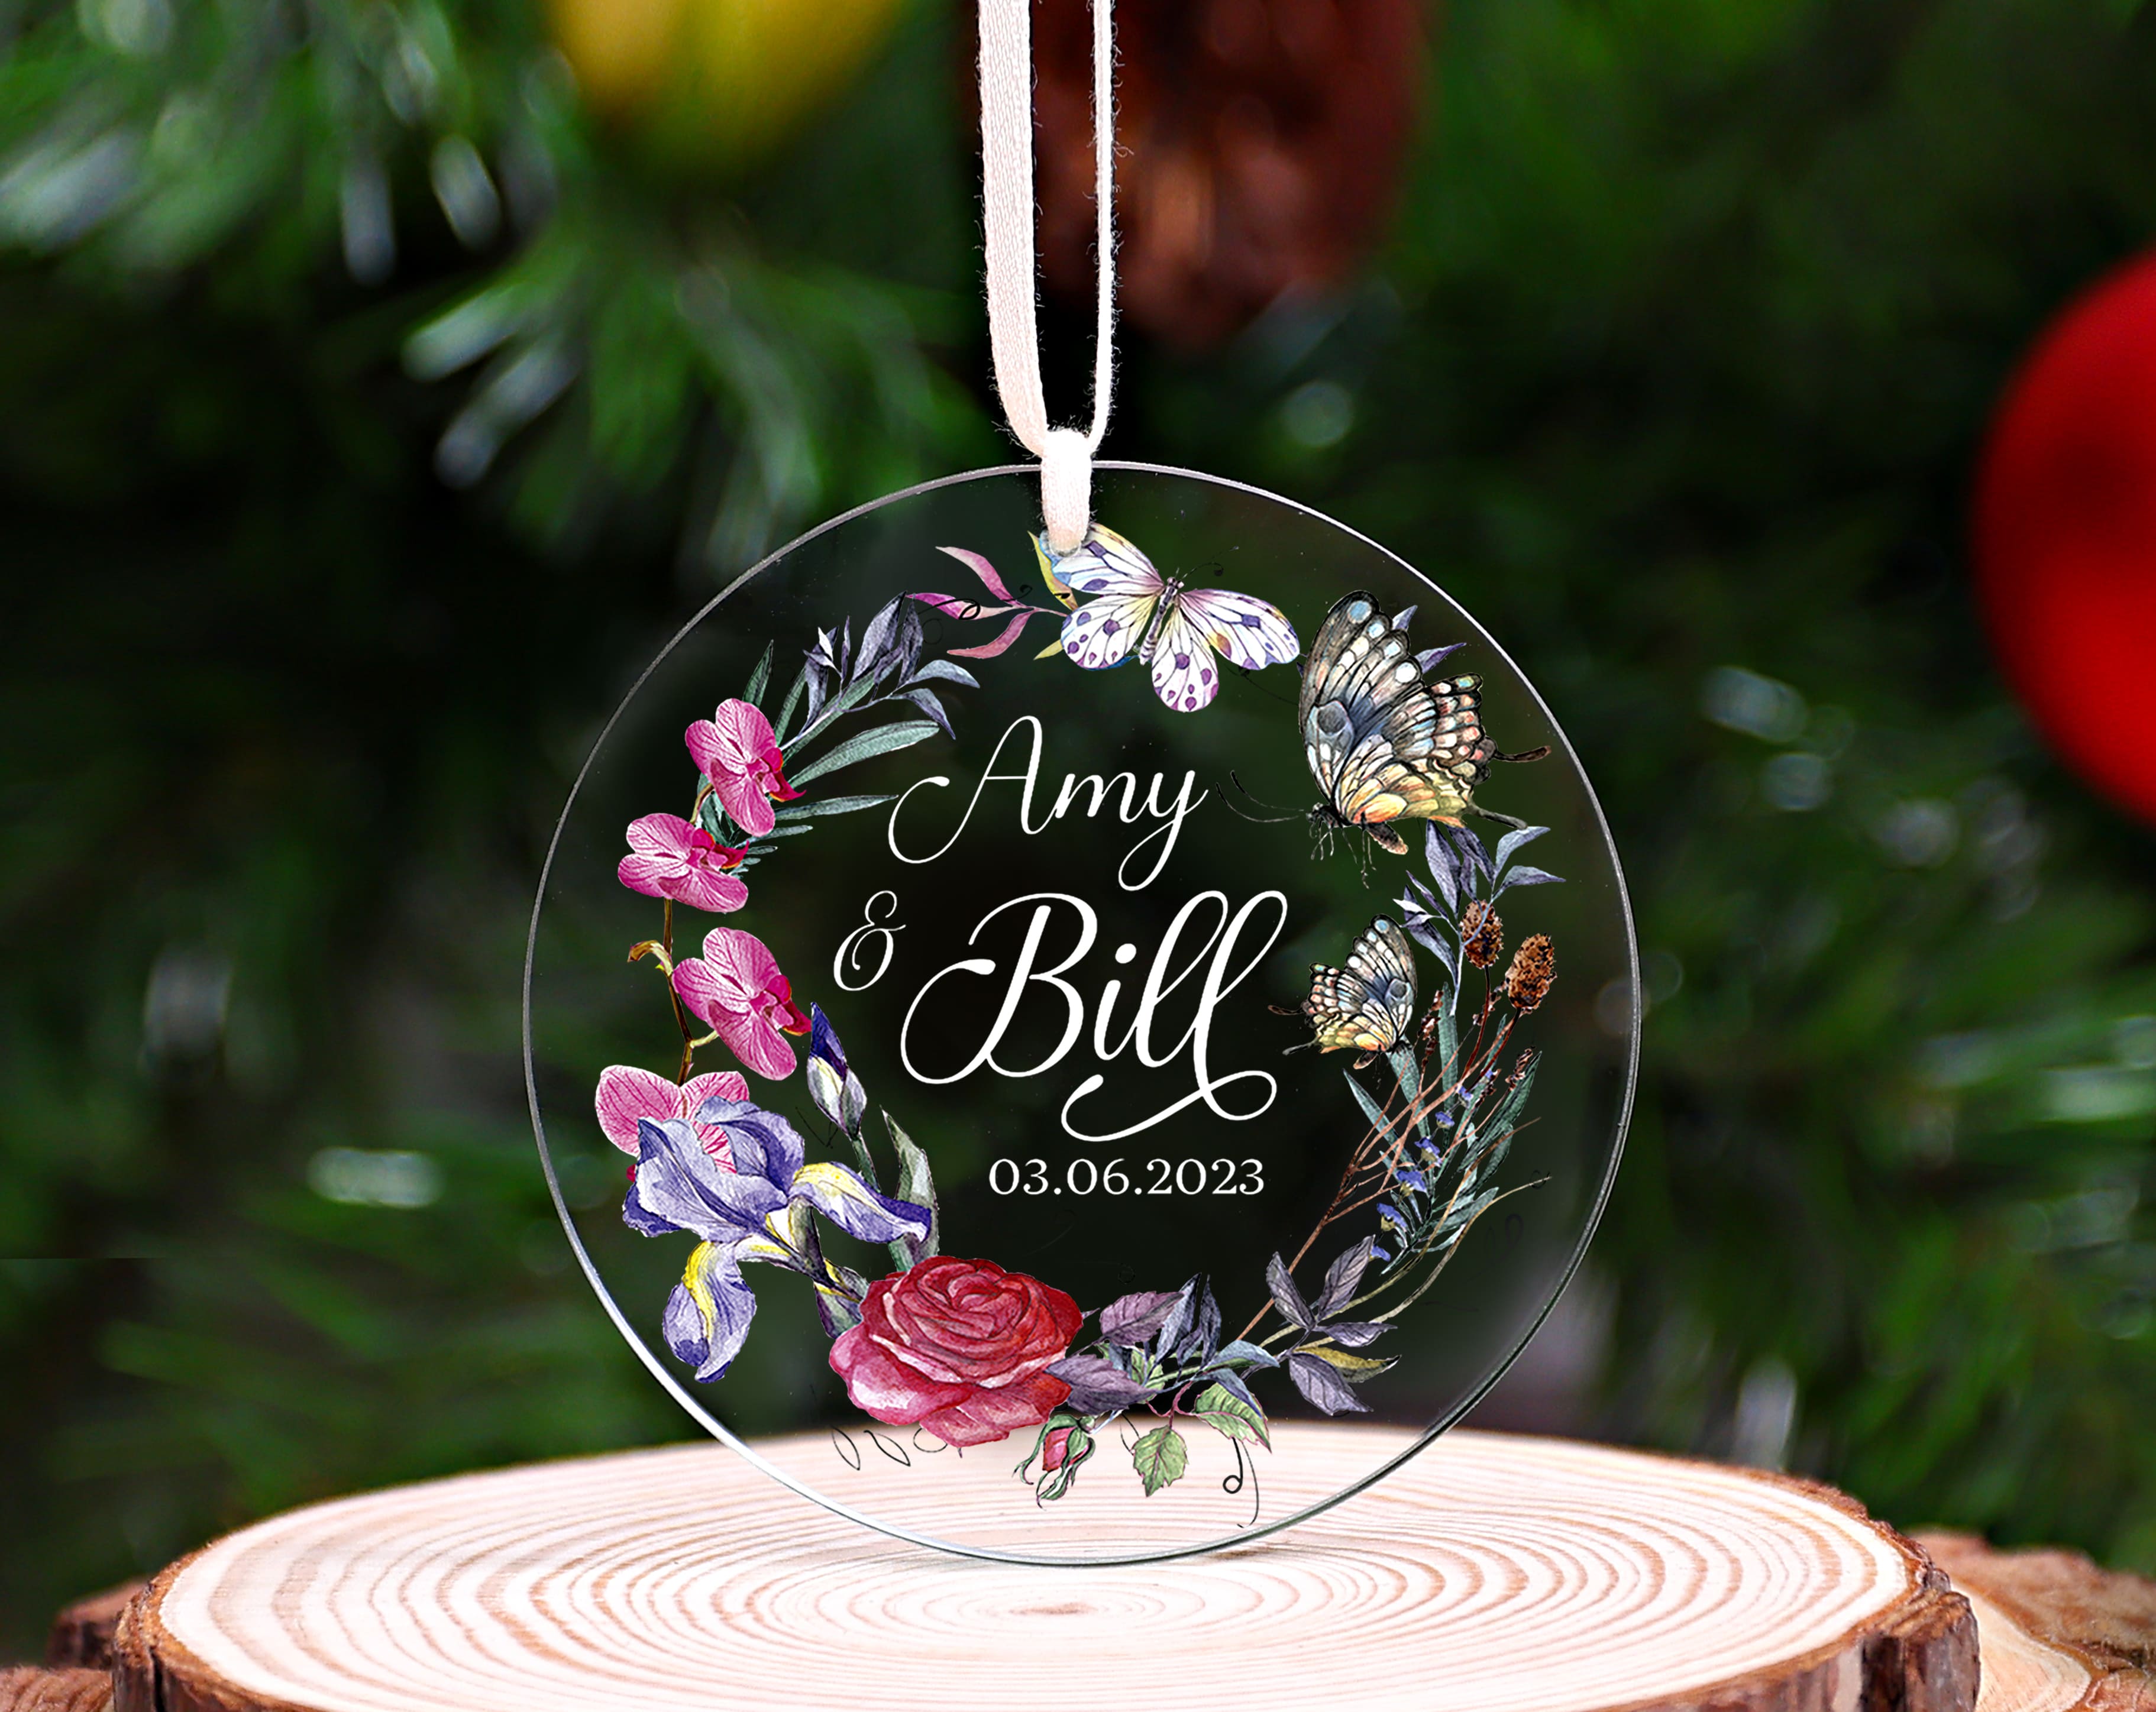 Wedding GLASS Ornament, Custom Married Ornament, Botanical Glass Ornament, Newlywed Floral Gift, Mr and Mrs Ornament, Bridal Shower Gift (Copy)